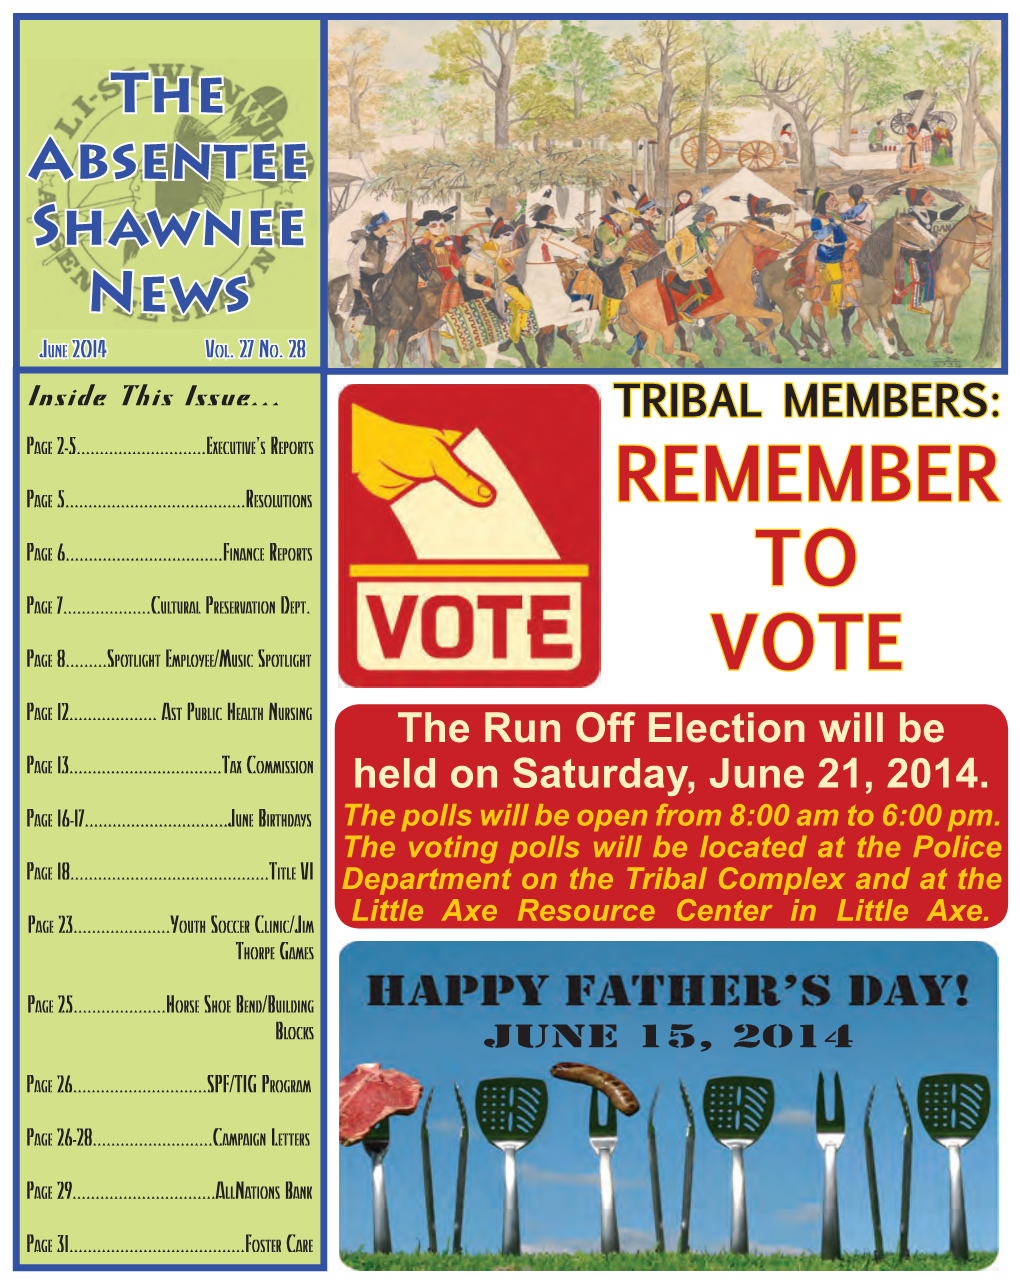 REMEMBER to VOTE: the Run Off Election Will Be Held on Saturday, June 21, 2014